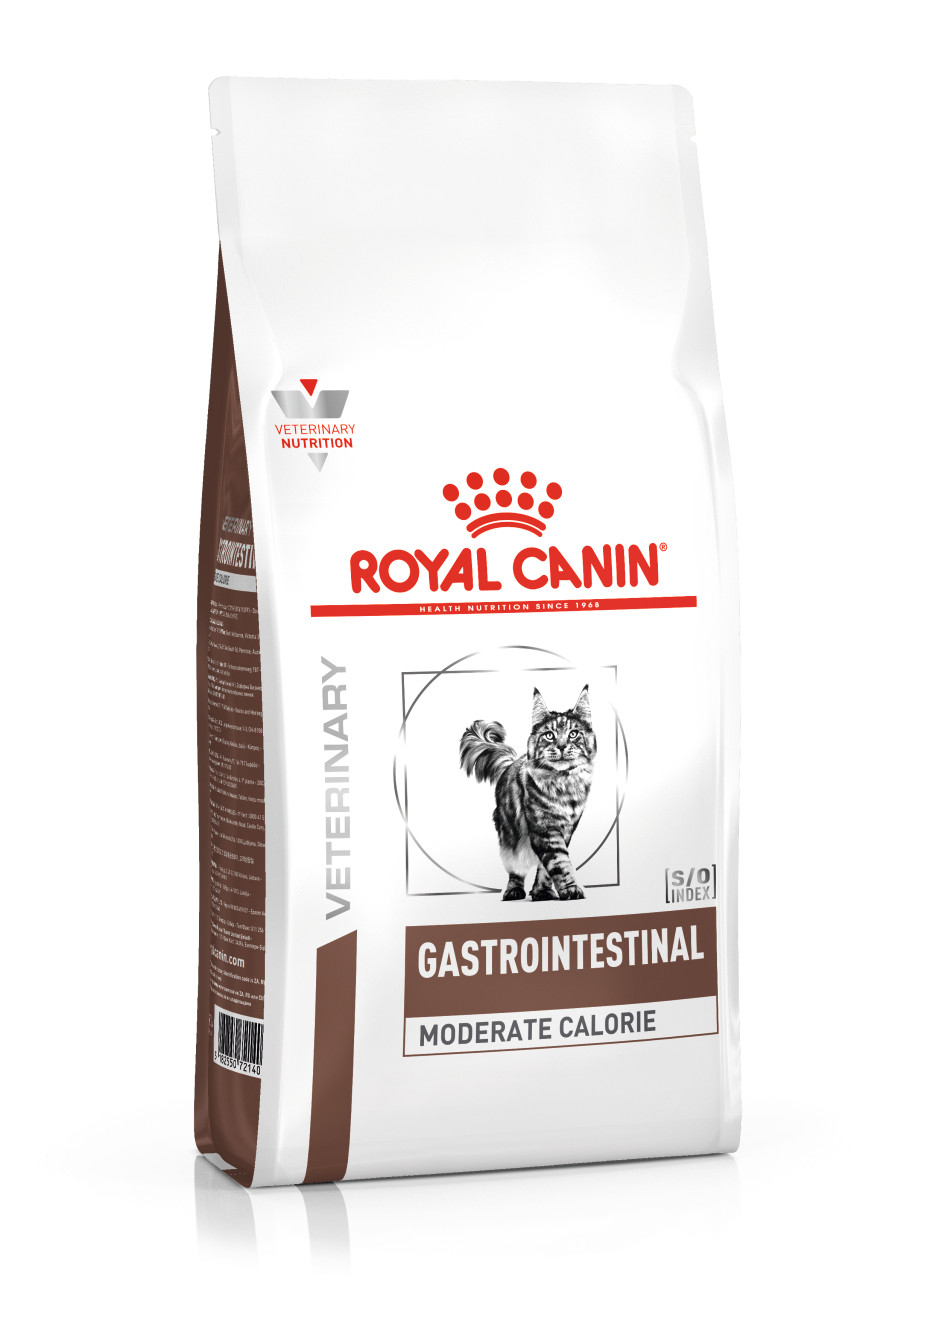 Royal Canin Veterinary Gastrointestinal Moderate Calorie pour chat